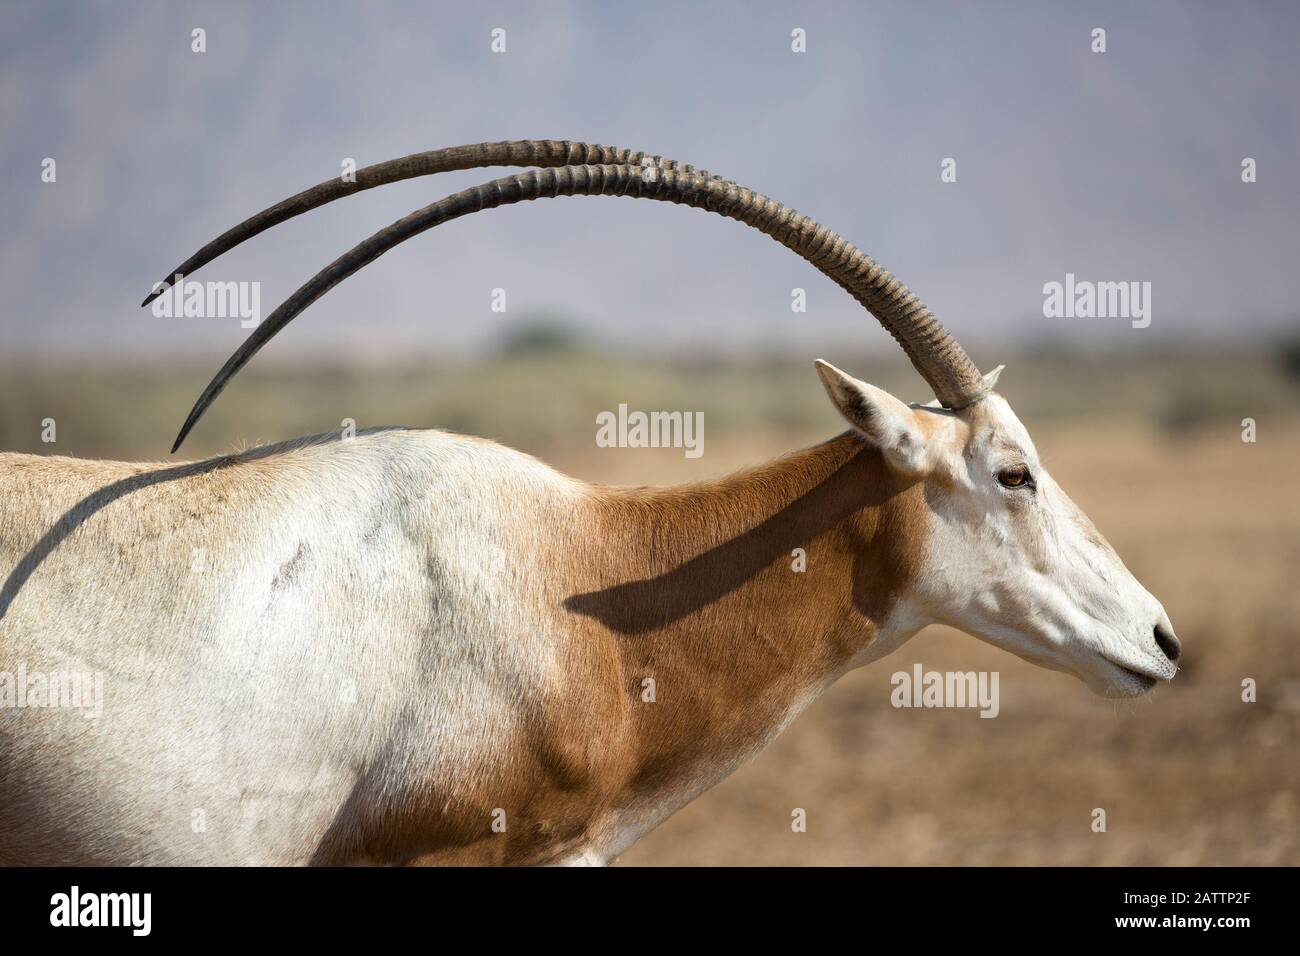 Scimitar-horned oryx, an endangered species that is extinct in the wild, in a breeding and reacclimation center in the Negev desert. Oryx dammah. Stock Photo